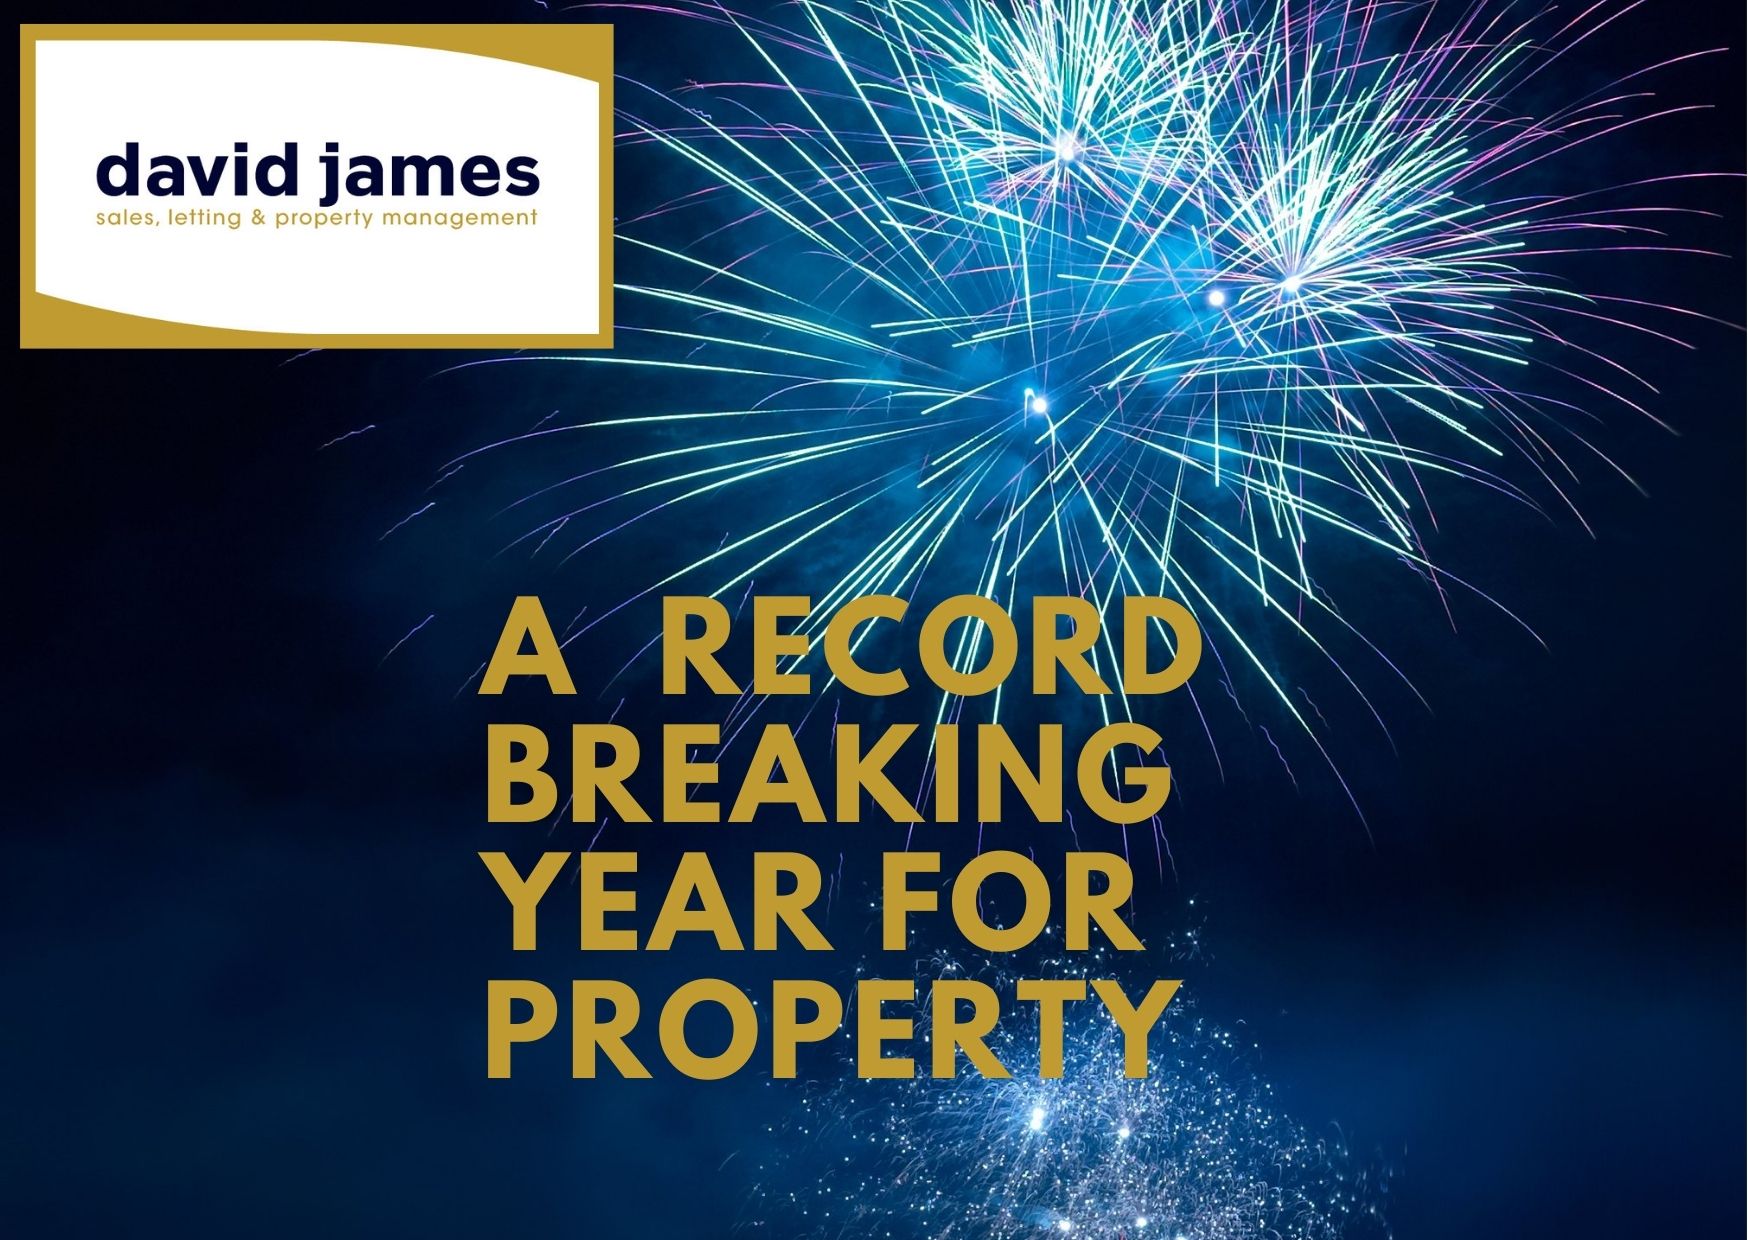 A record breaking year for property